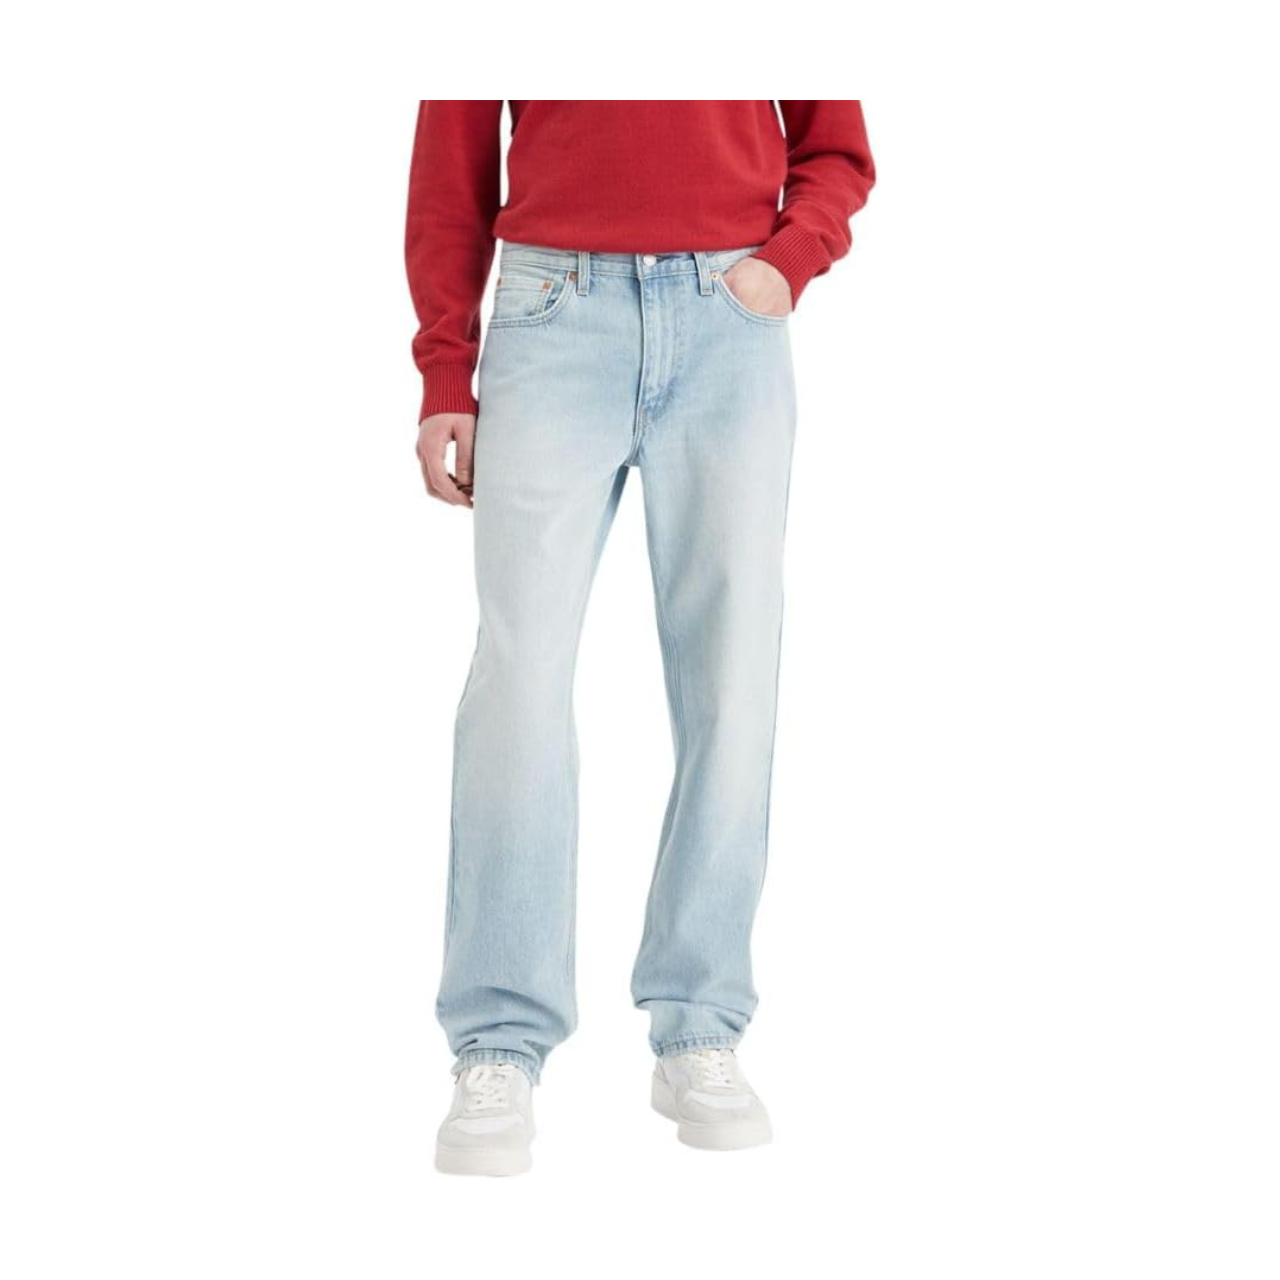 Levi’s Men’s 550 Relaxed Fit Jeans